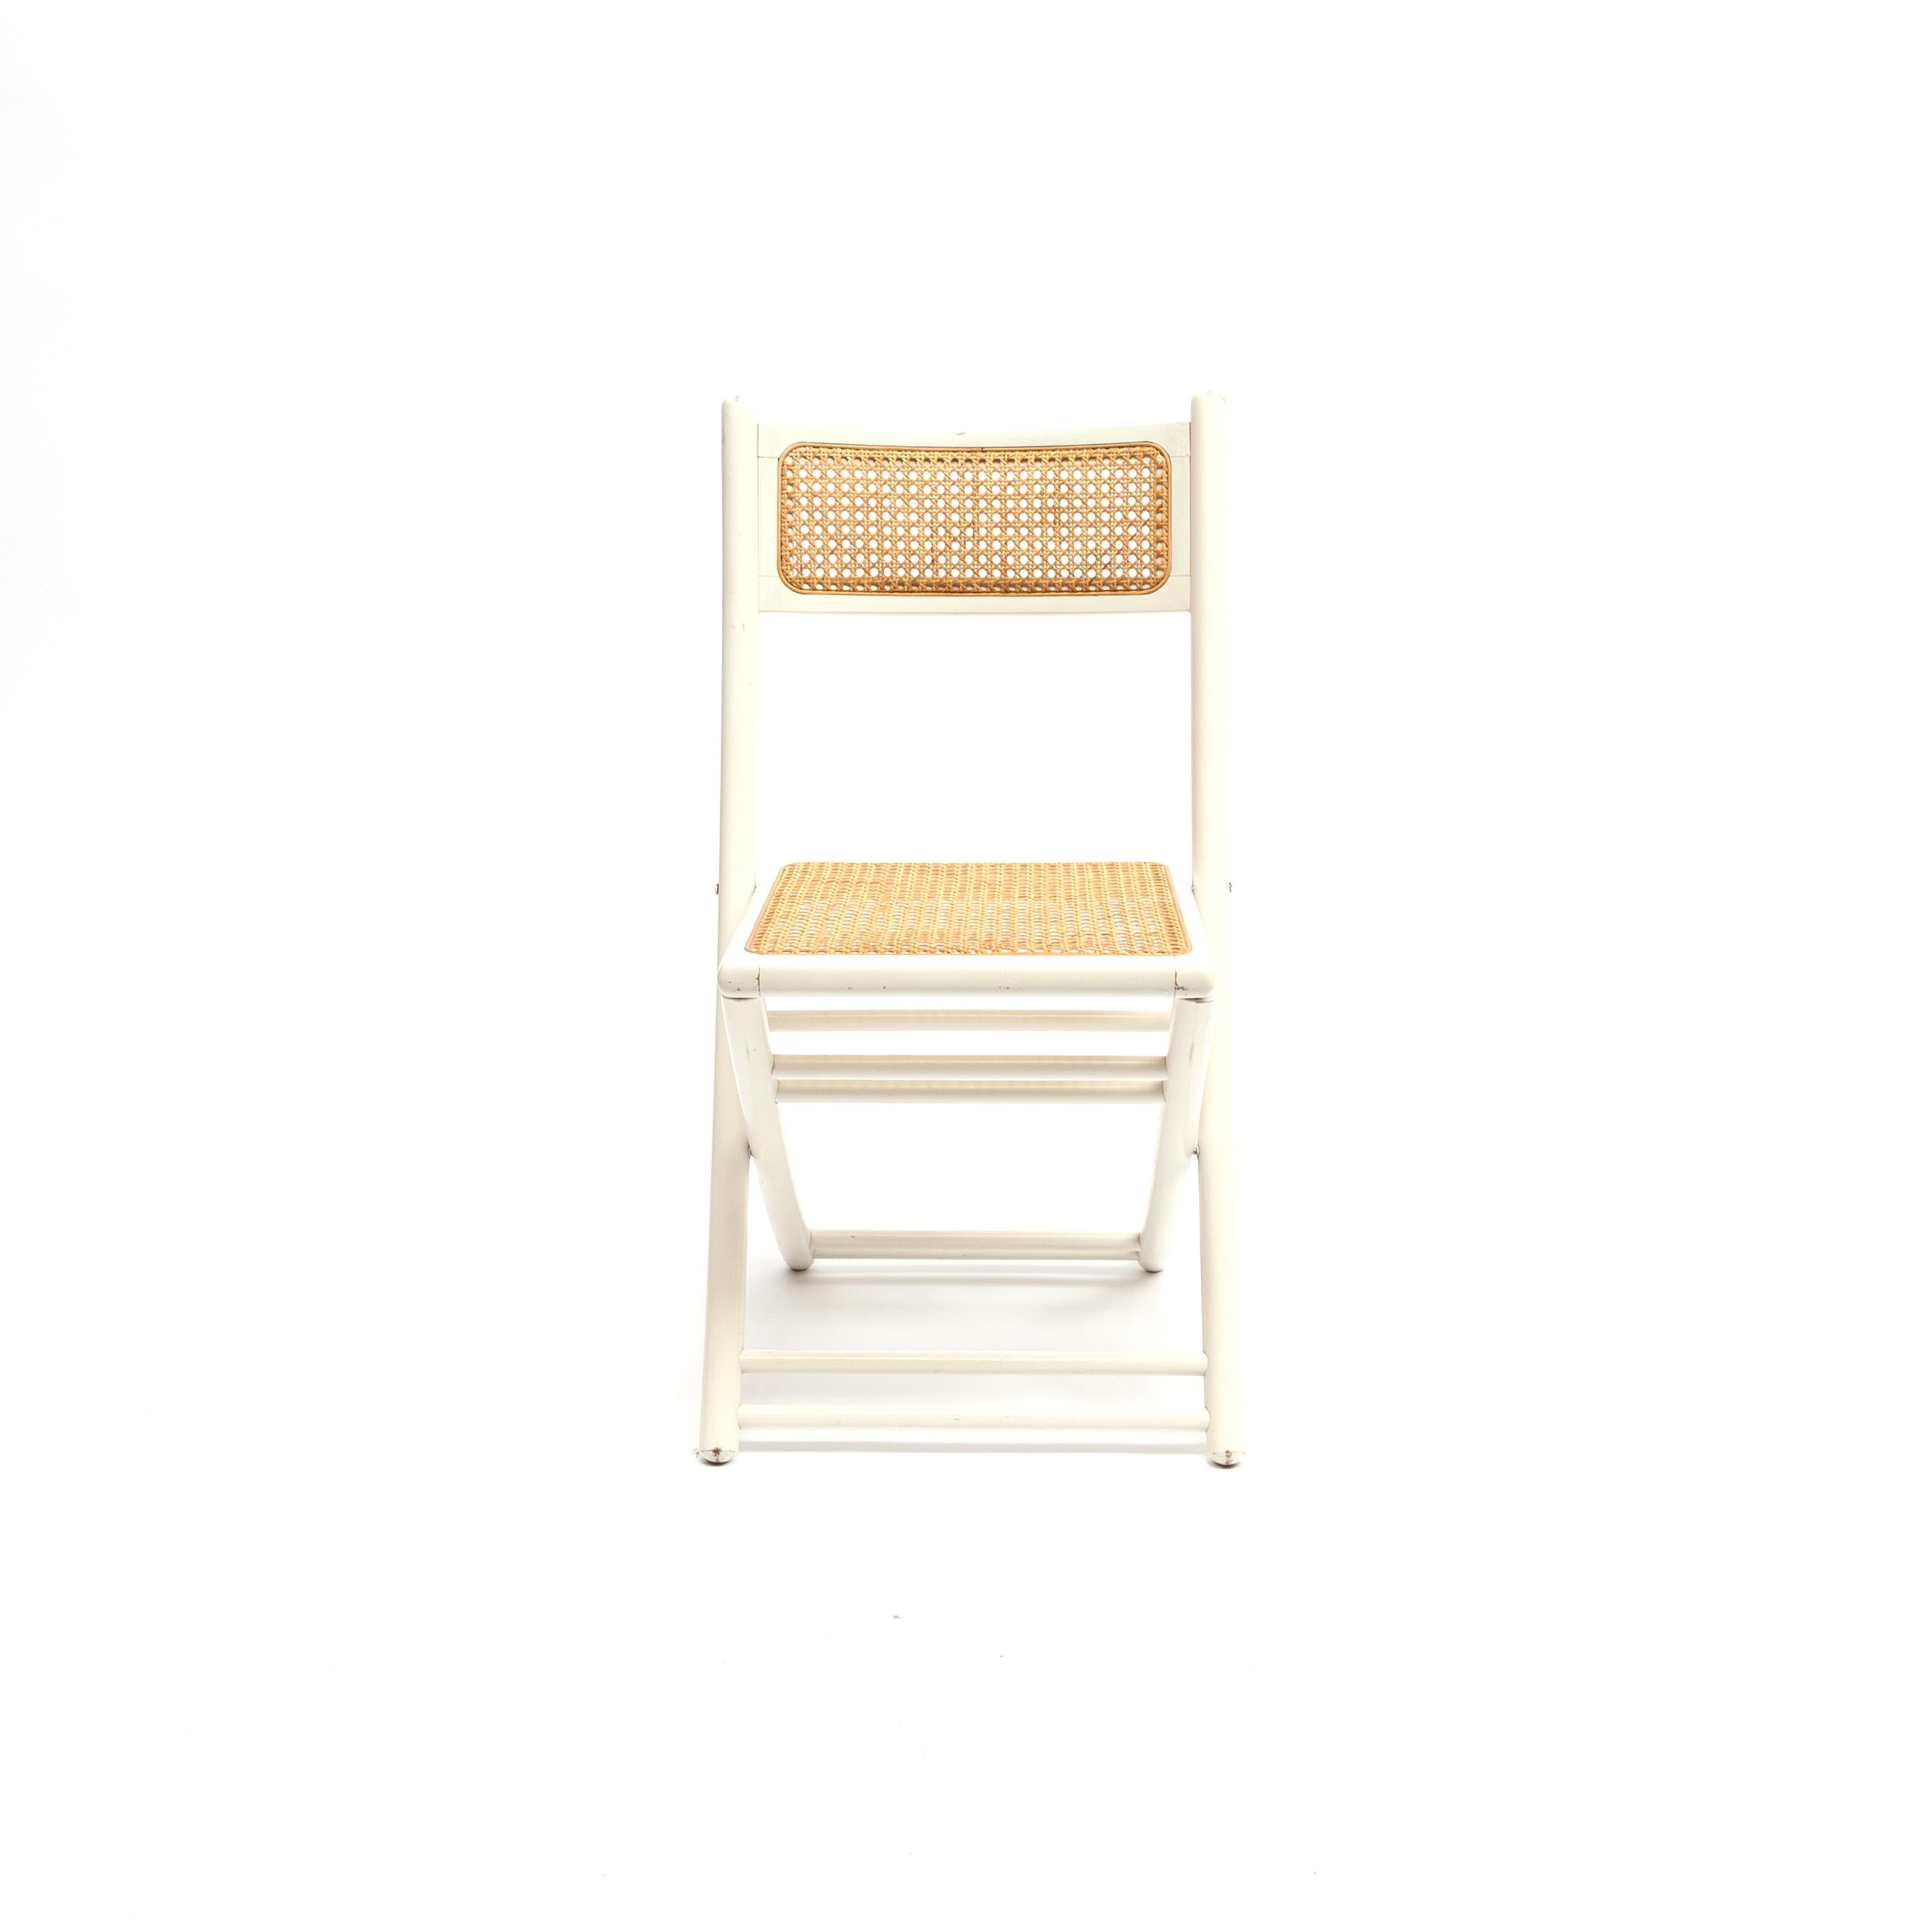 Mid-Century Modern Folding Chair in White Lacquered Wood with Webbing Seat and Backrest 1960s-1970s